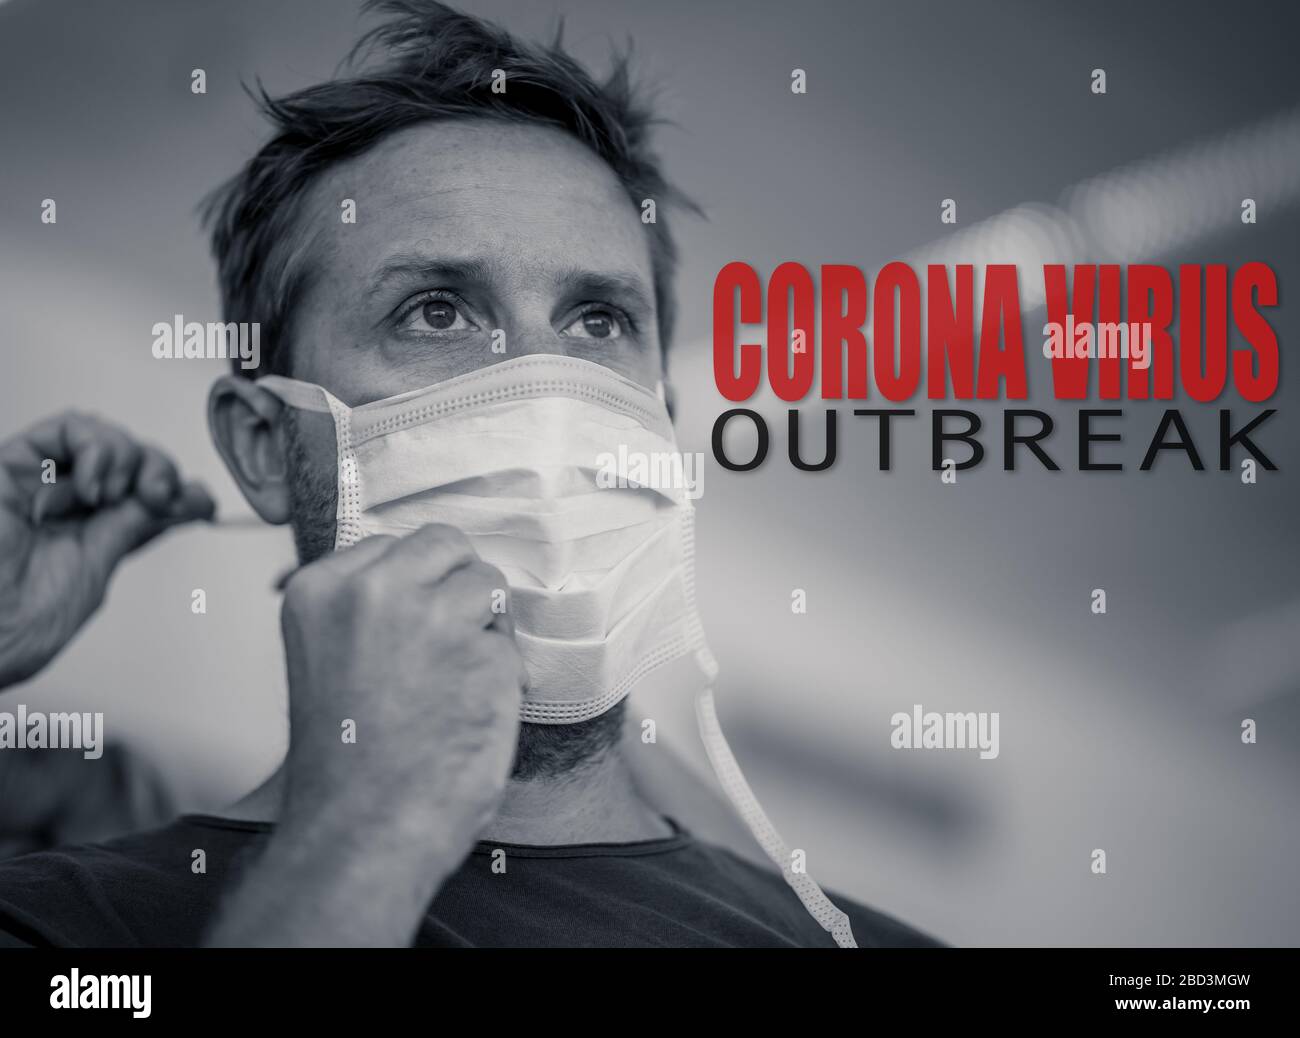 COVID-19 Save lives campaign. Strong image of hands helping young man putting face mask. In Stay Healthy, Stop the coronavirus spread, together we can Stock Photo